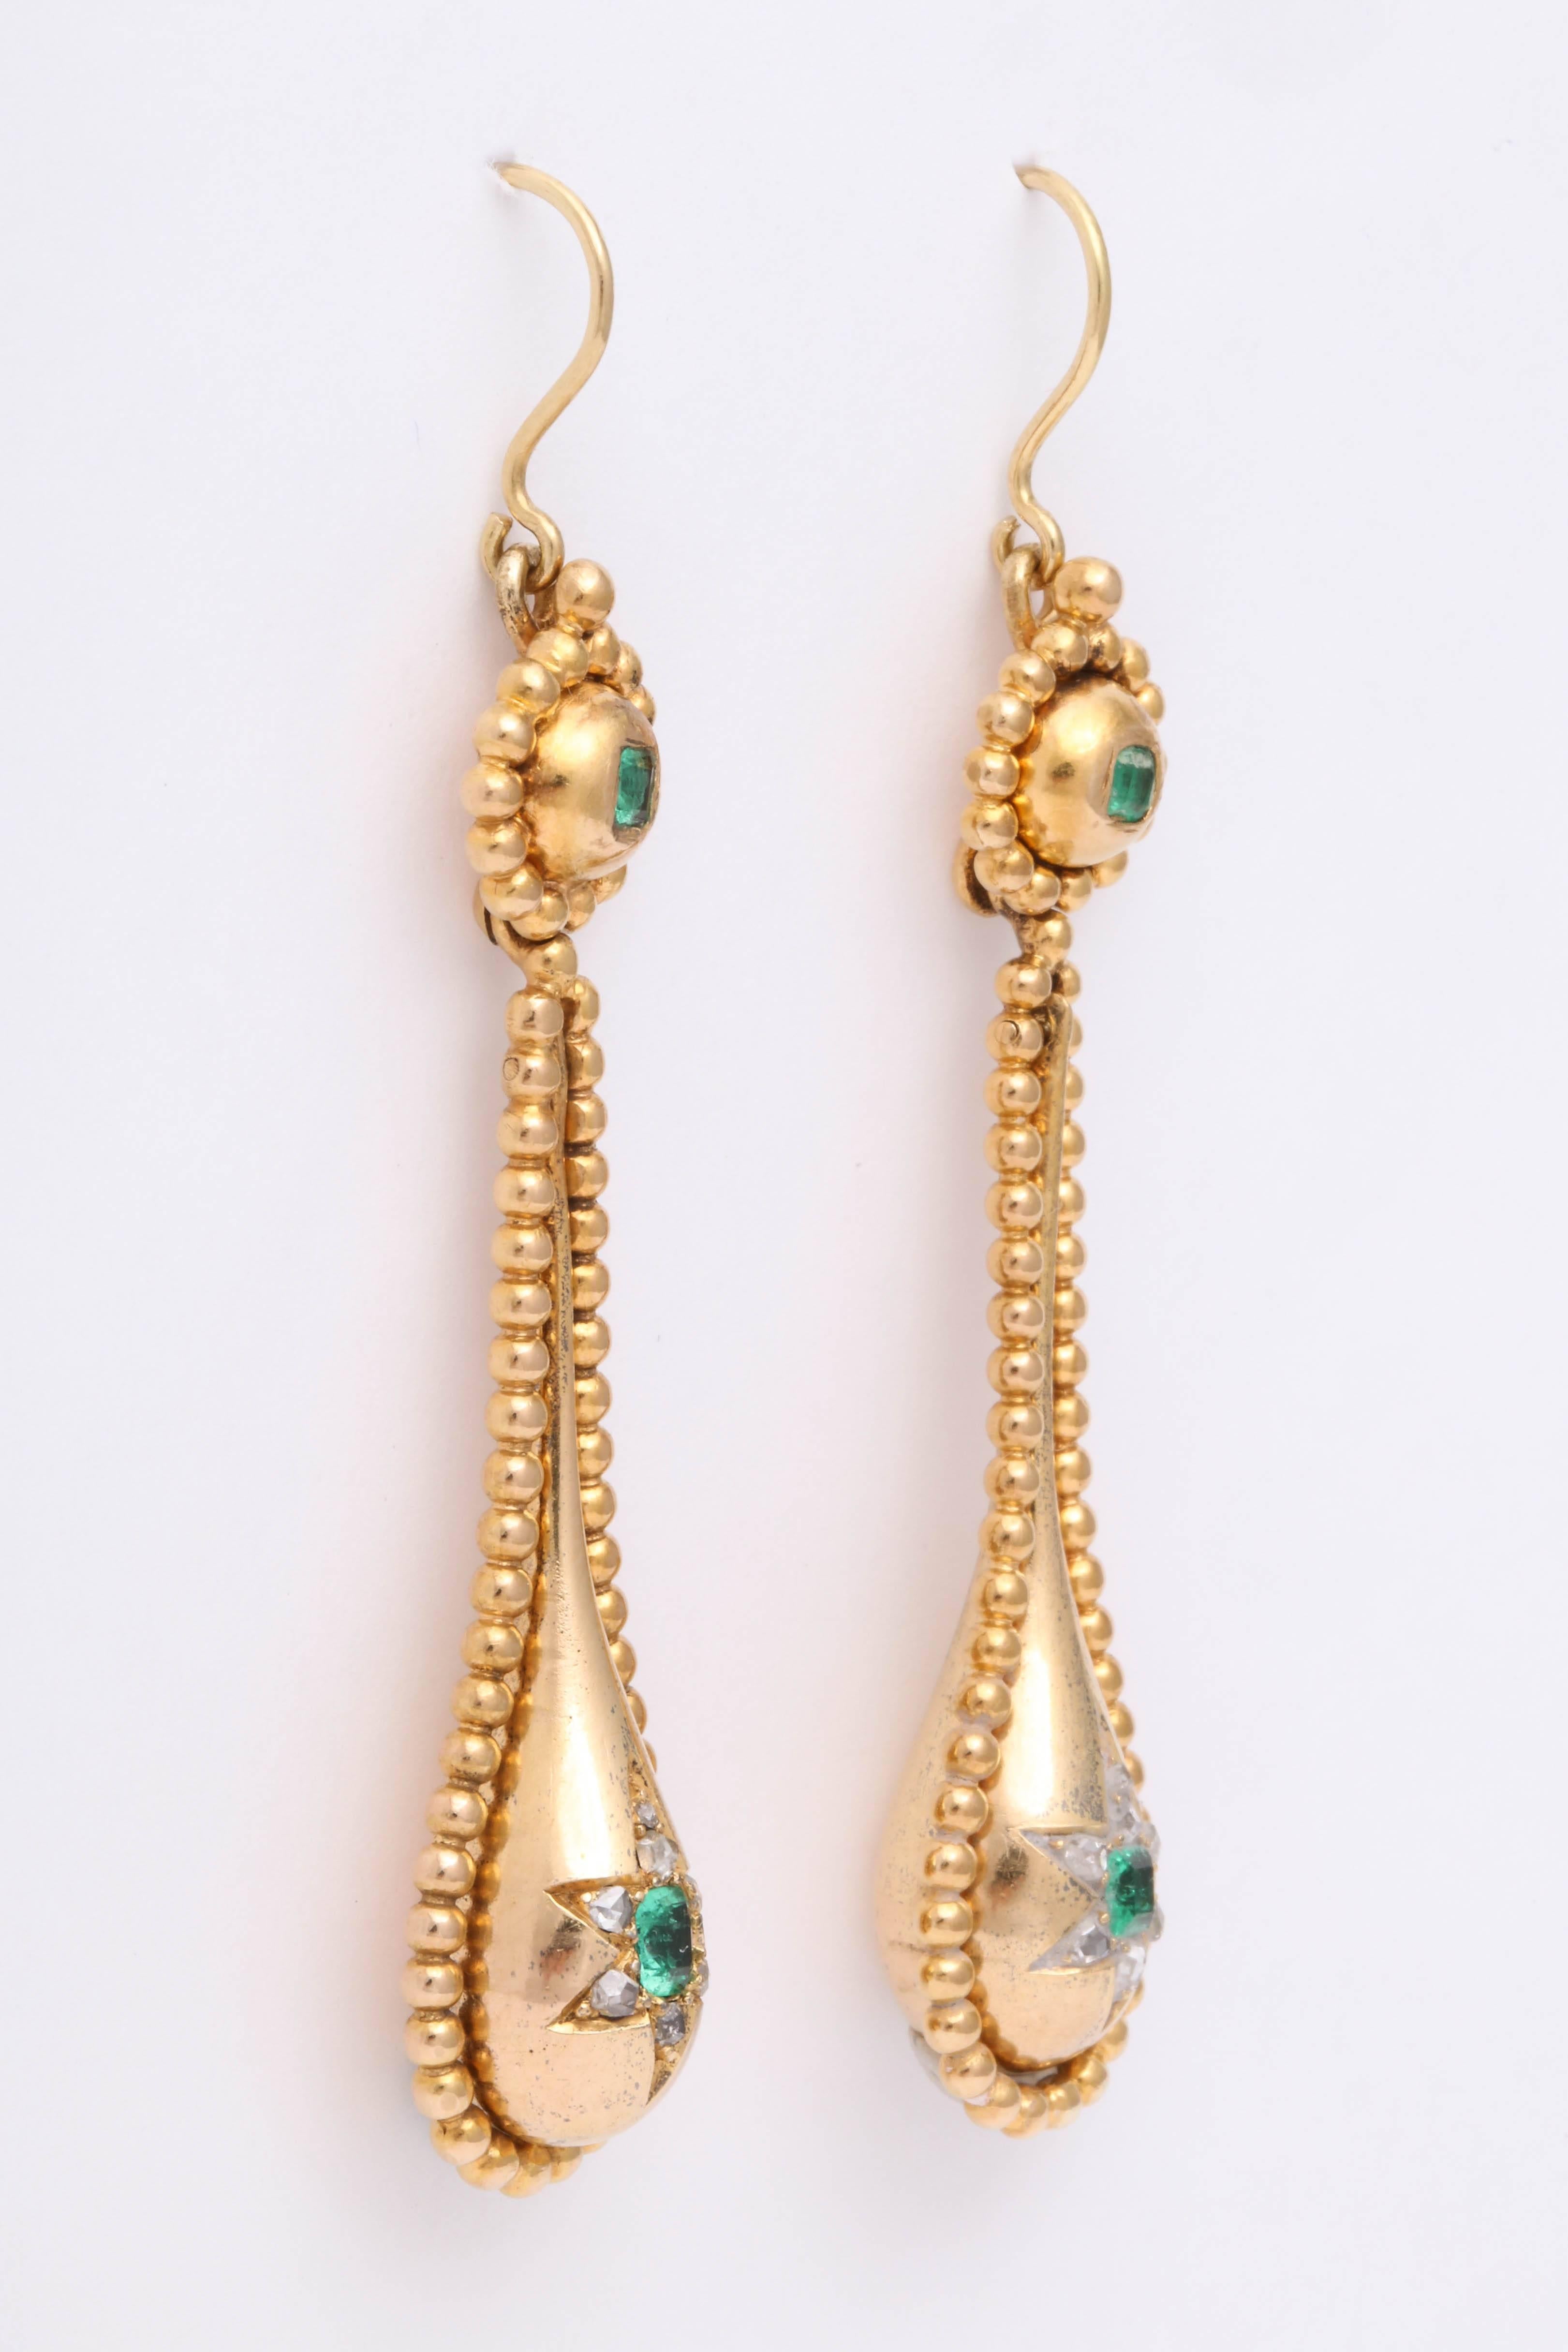 English earrings set with emeralds and diamonds in 18K yellow gold dating to the Victorian era.